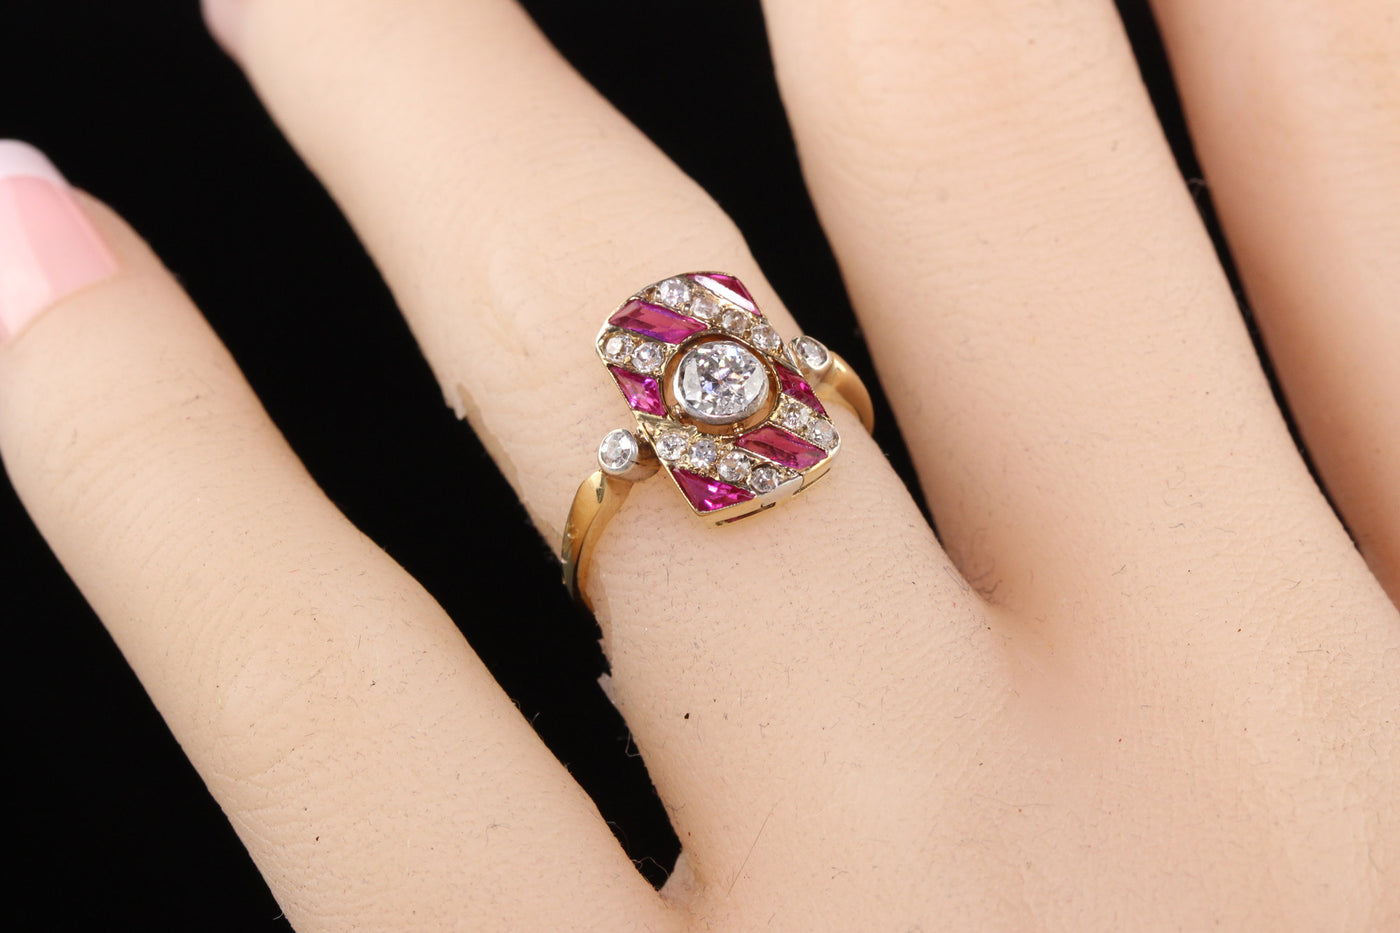 Antique Edwardian 14K Yellow Gold Old Mine Diamond and Ruby Ring